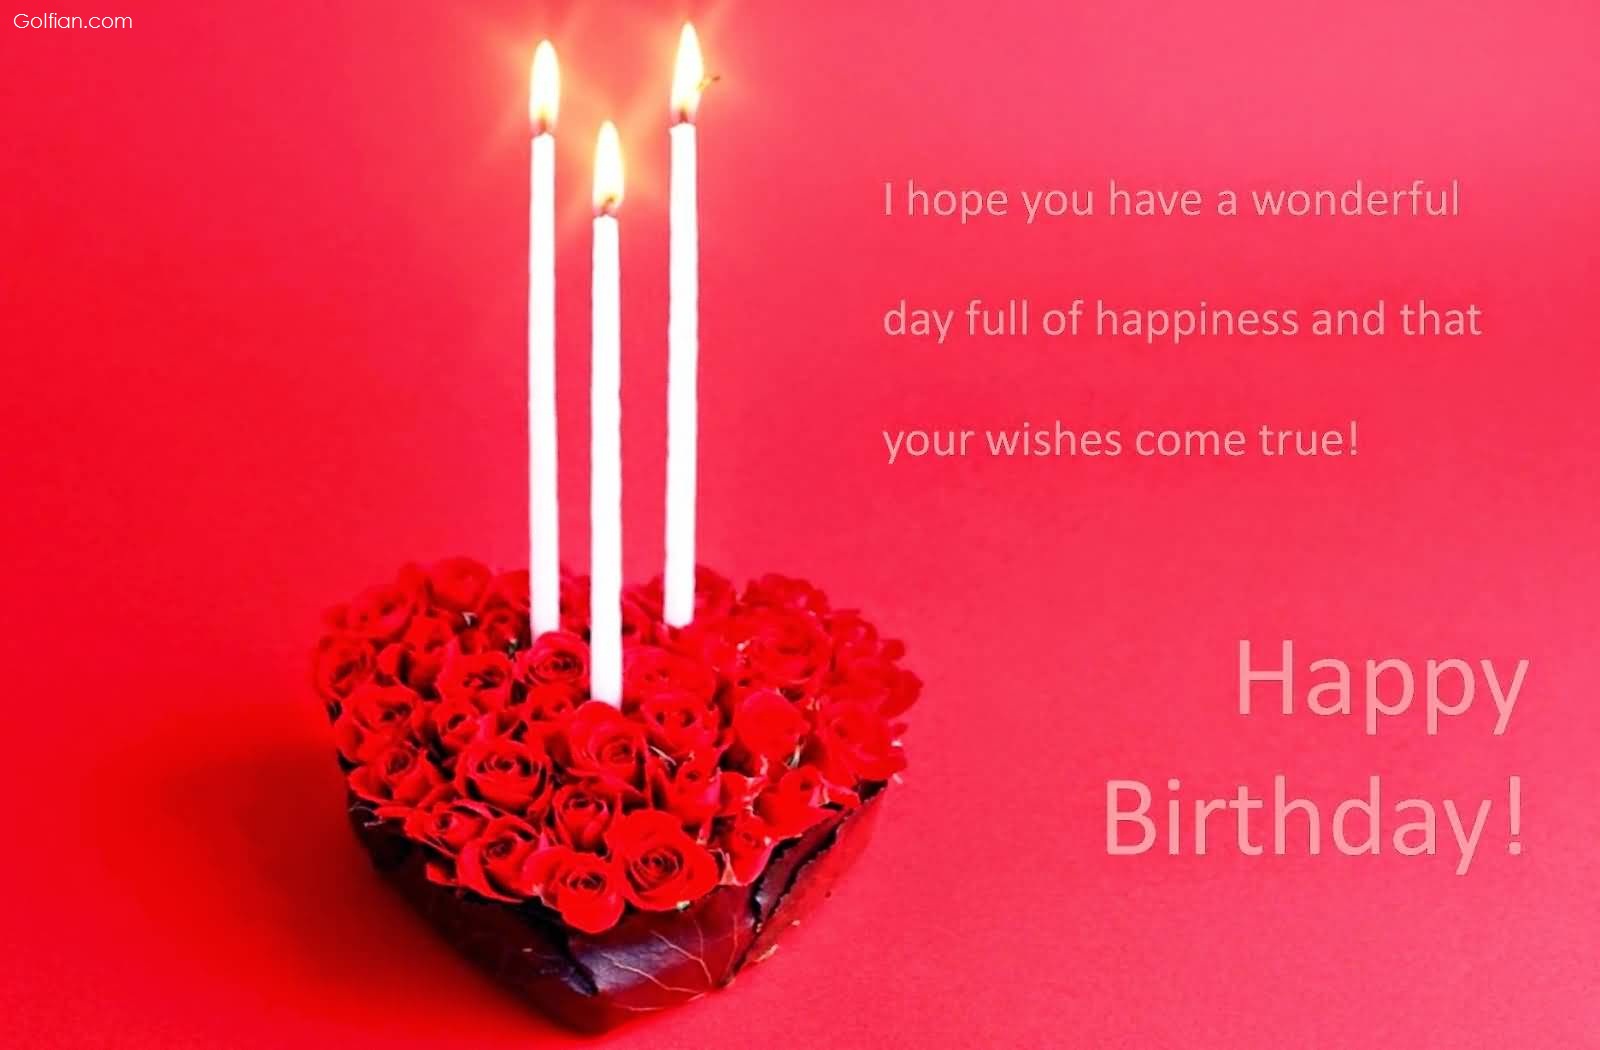 birthday wishes wallpaper for lover,candle,red,lighting,valentine's day,heart